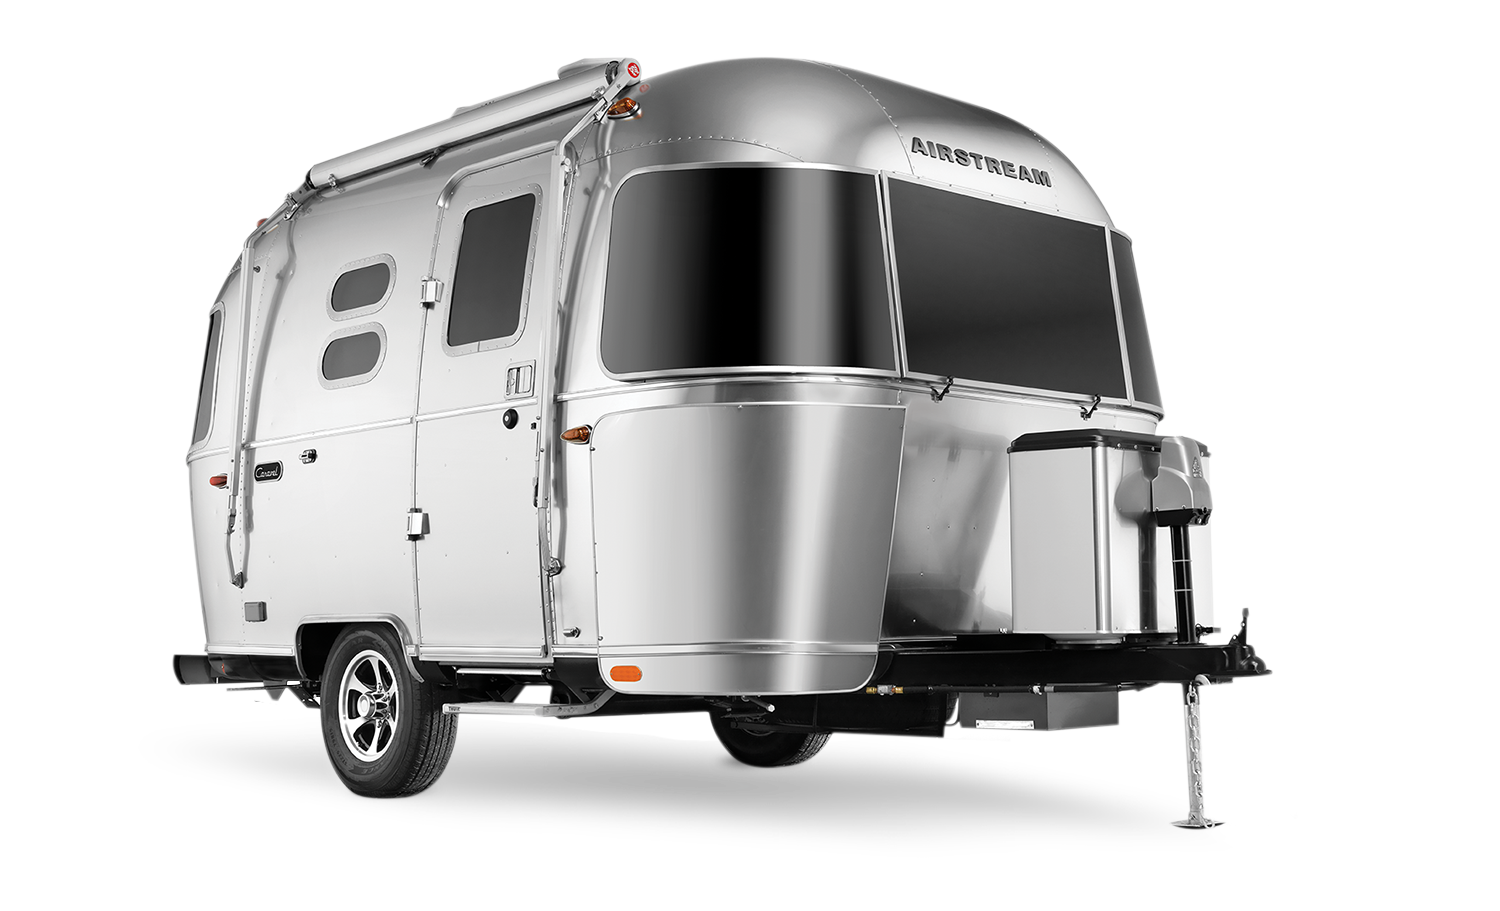 https://www.colonialairstream.com/wp-content/uploads/2020/07/2020-Caravel-16.png